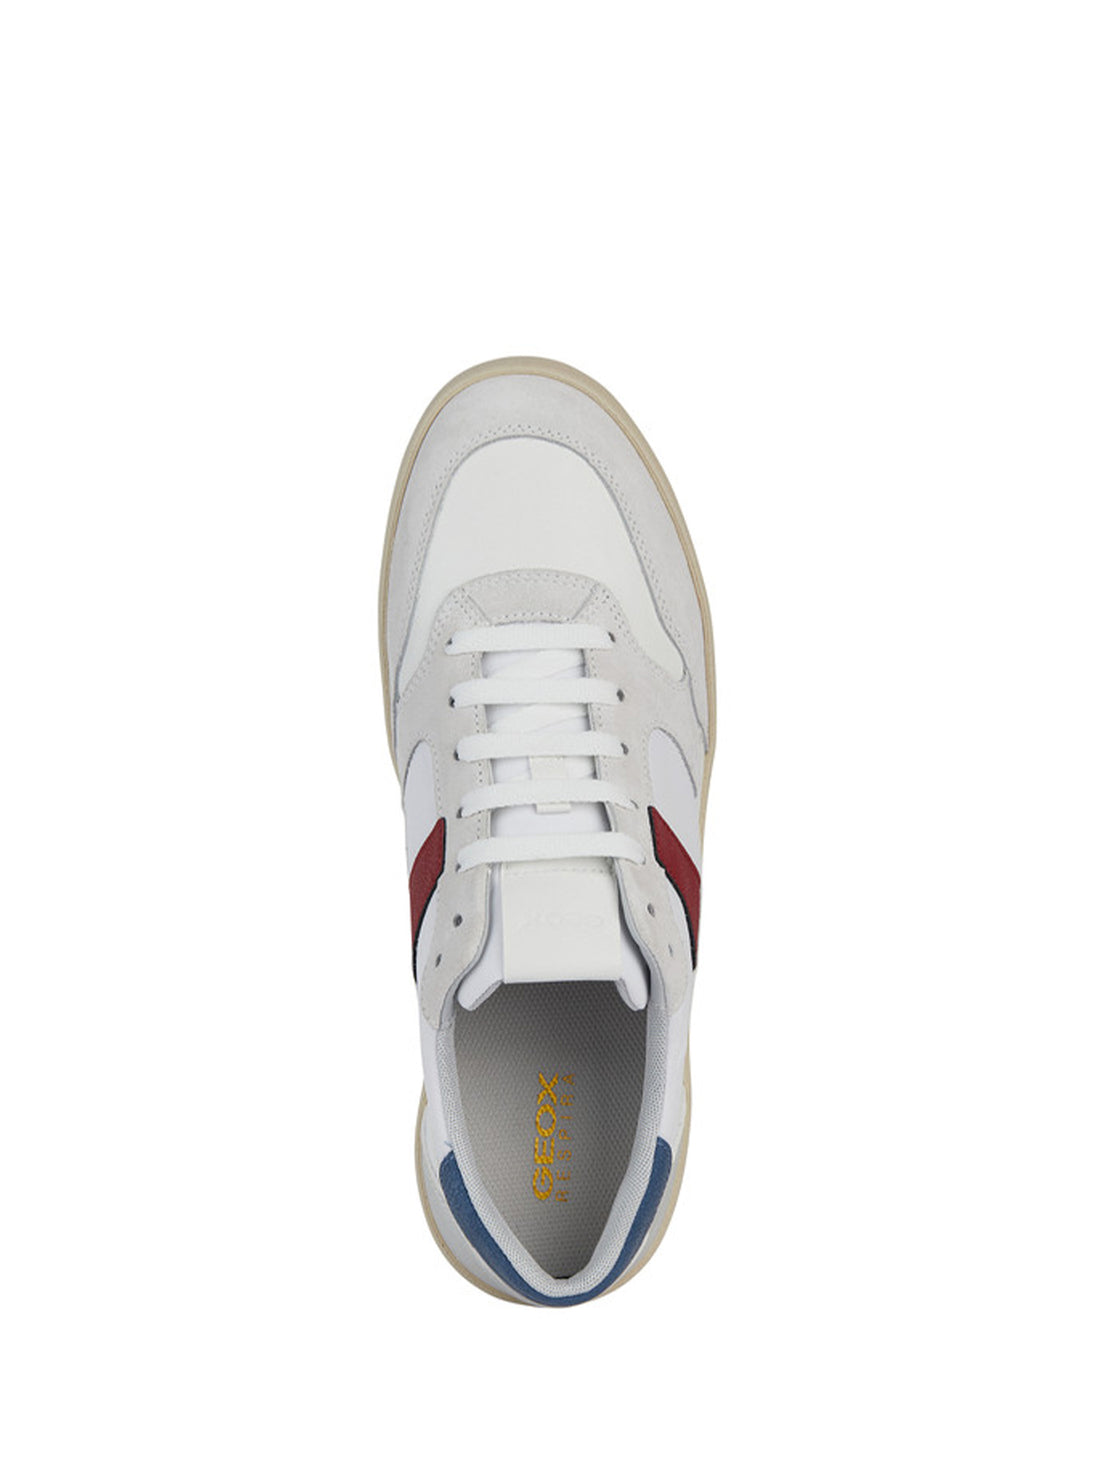 Sneakers Bianco Rosso Geox